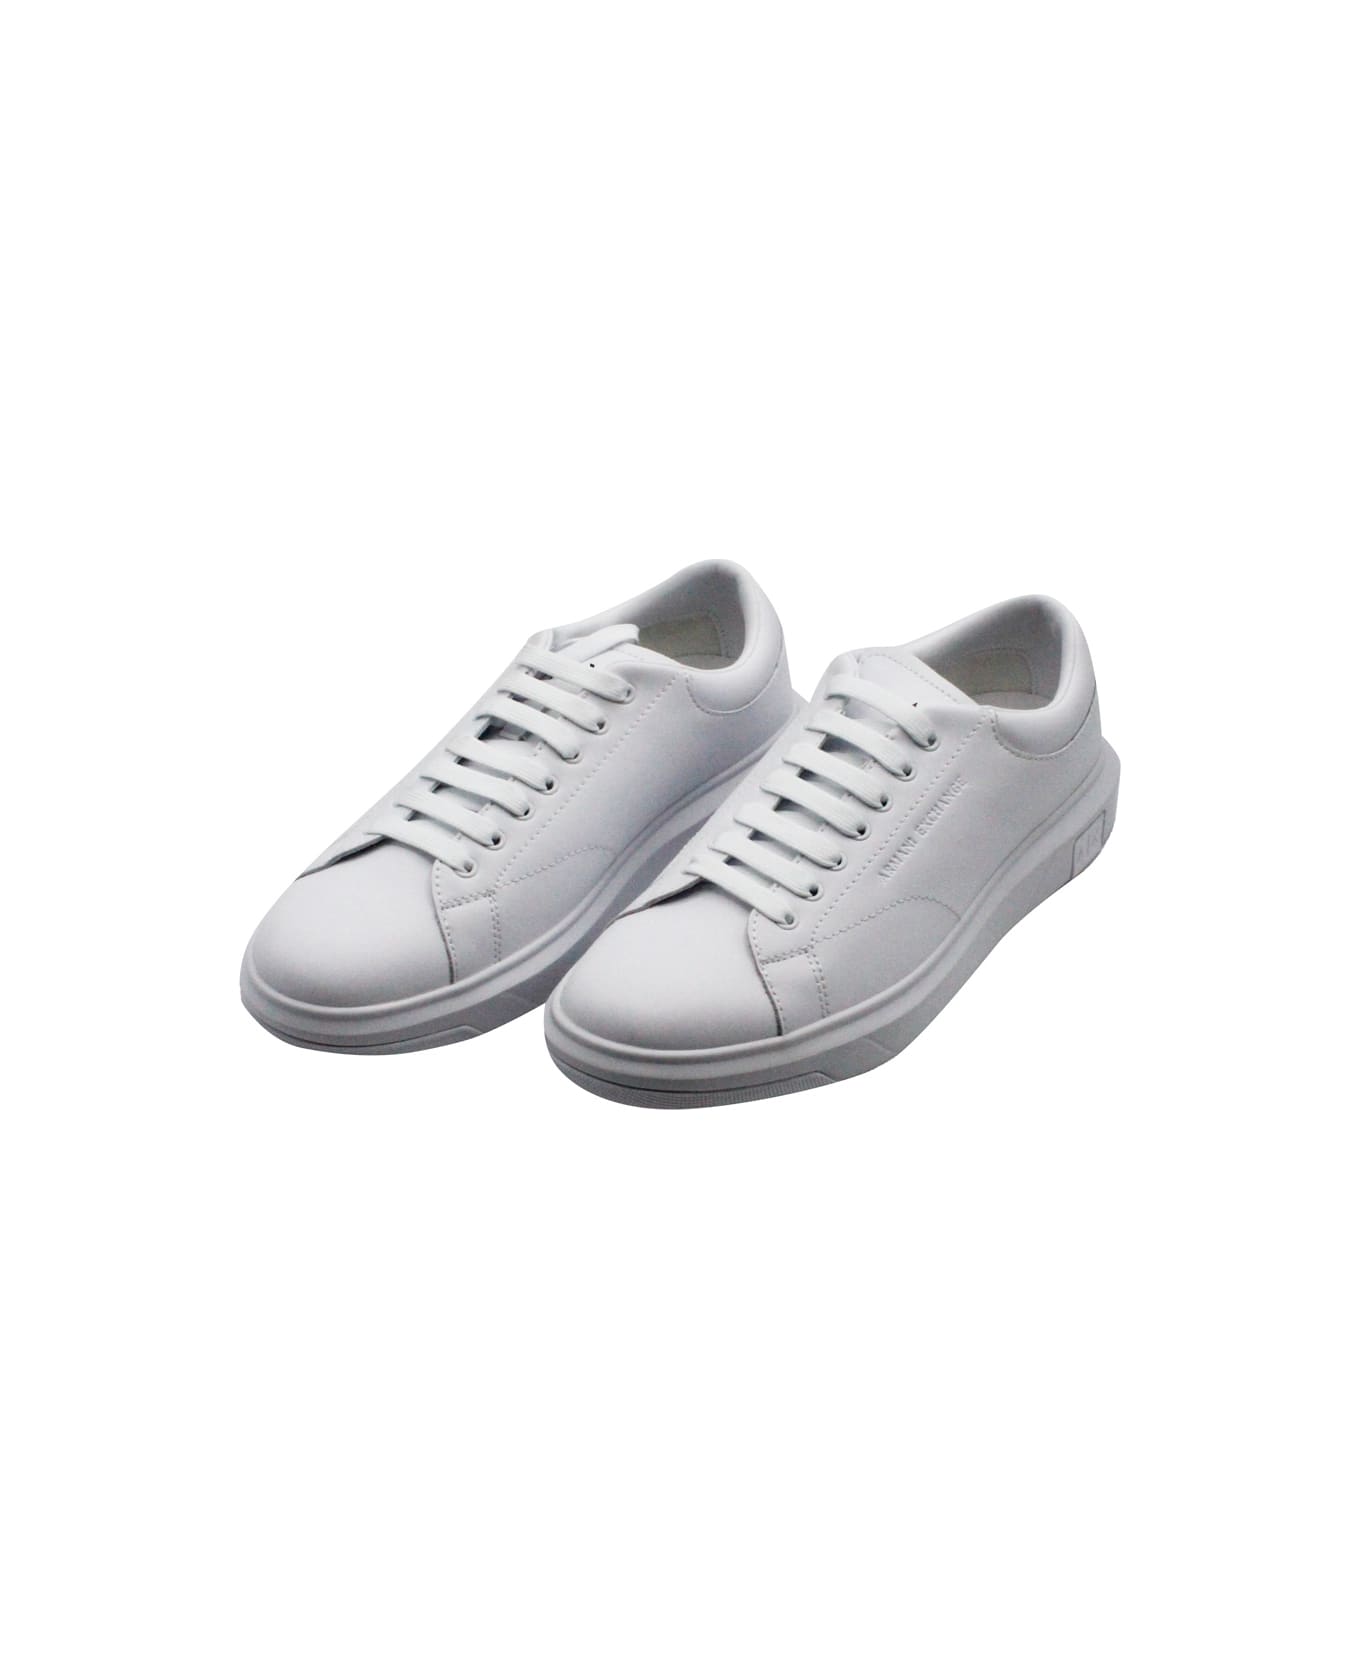 Armani Collezioni Leather Sneakers With Matching Box Sole And Lace Closure. Small Logo On The Tongue And Back - White スニーカー